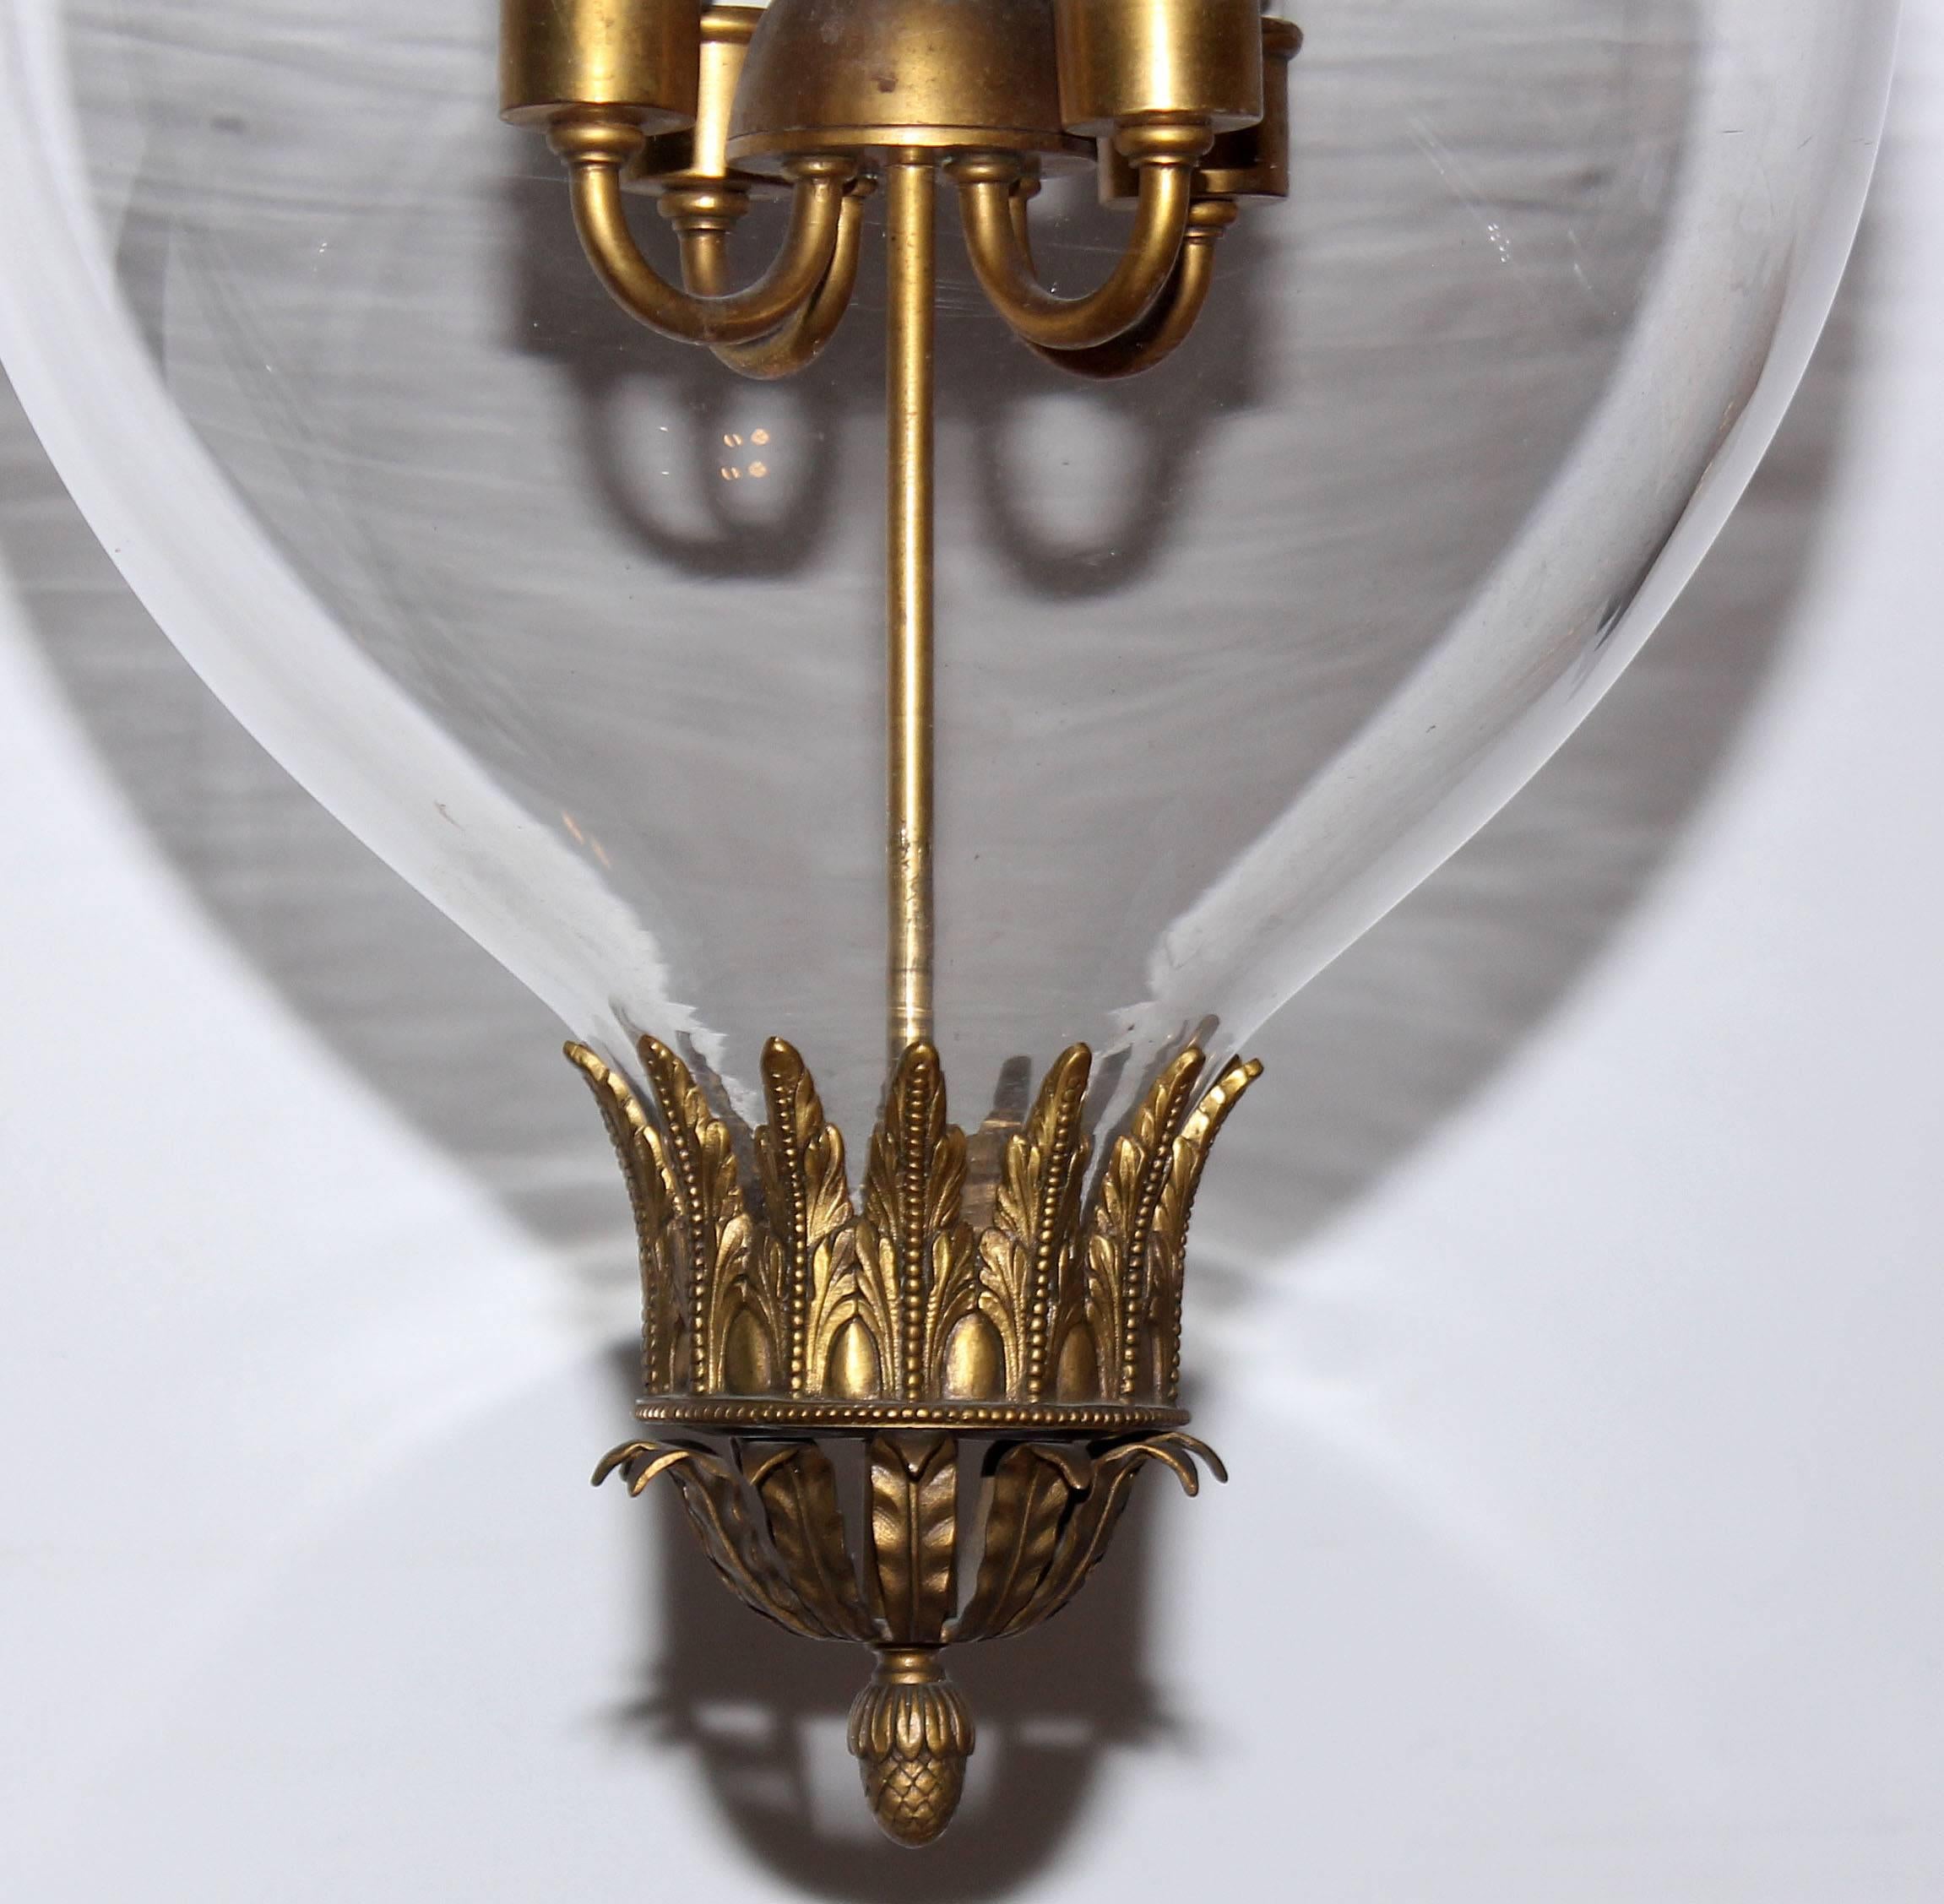 Neoclassical Revival Pendant Chandelier Hanging Lantern For Sale